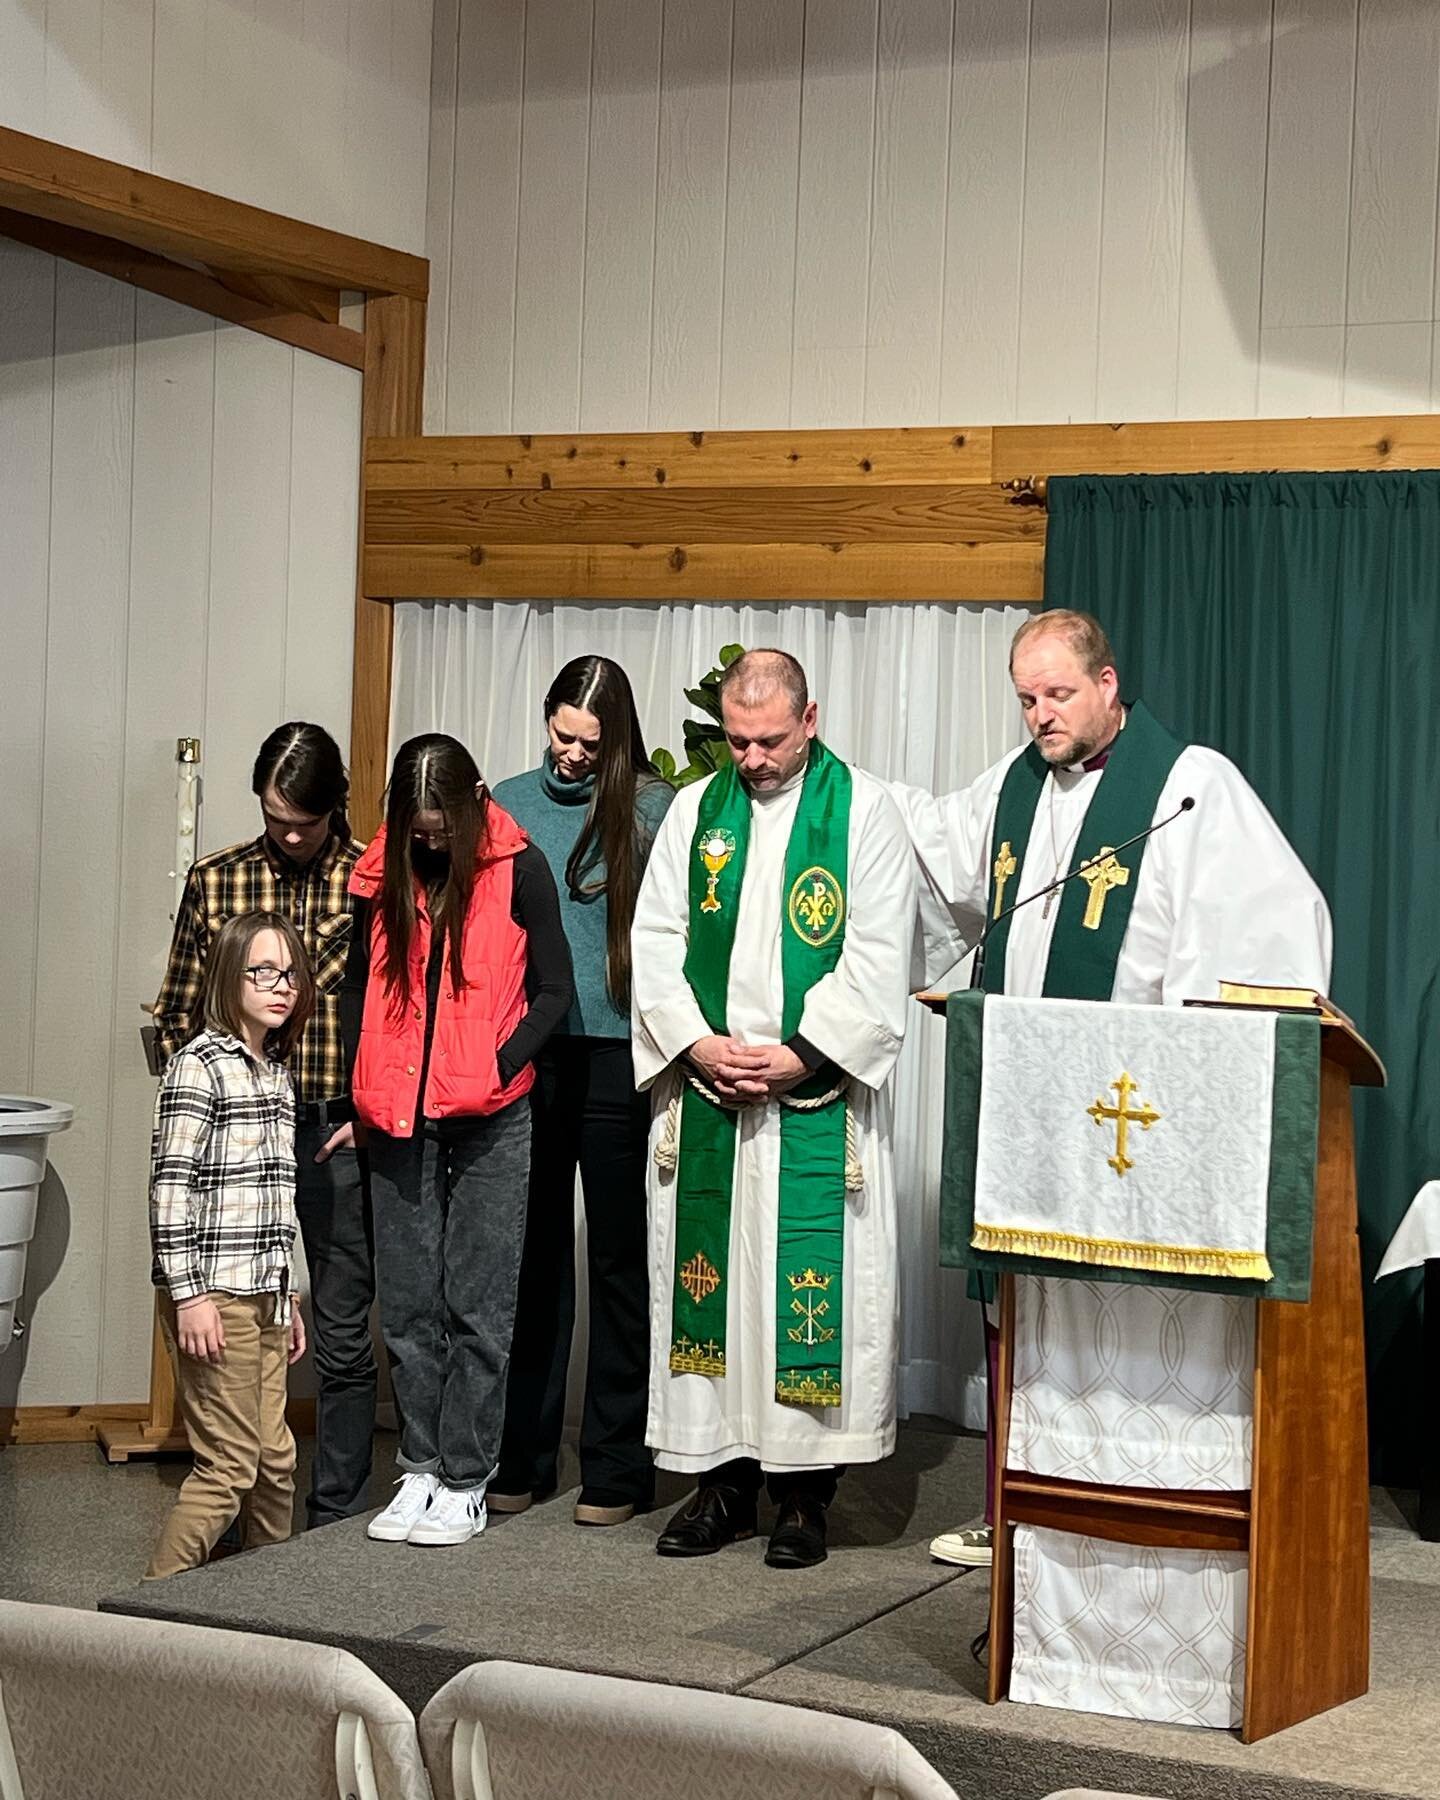 Last Sunday we prayed for the Wall family to send them out on their journey to Toronto, Canada, where they&rsquo;ll join the family at Christ the King Anglican with Fr. Benjamin serving as their rector. We are so thankful for the countless ways they 